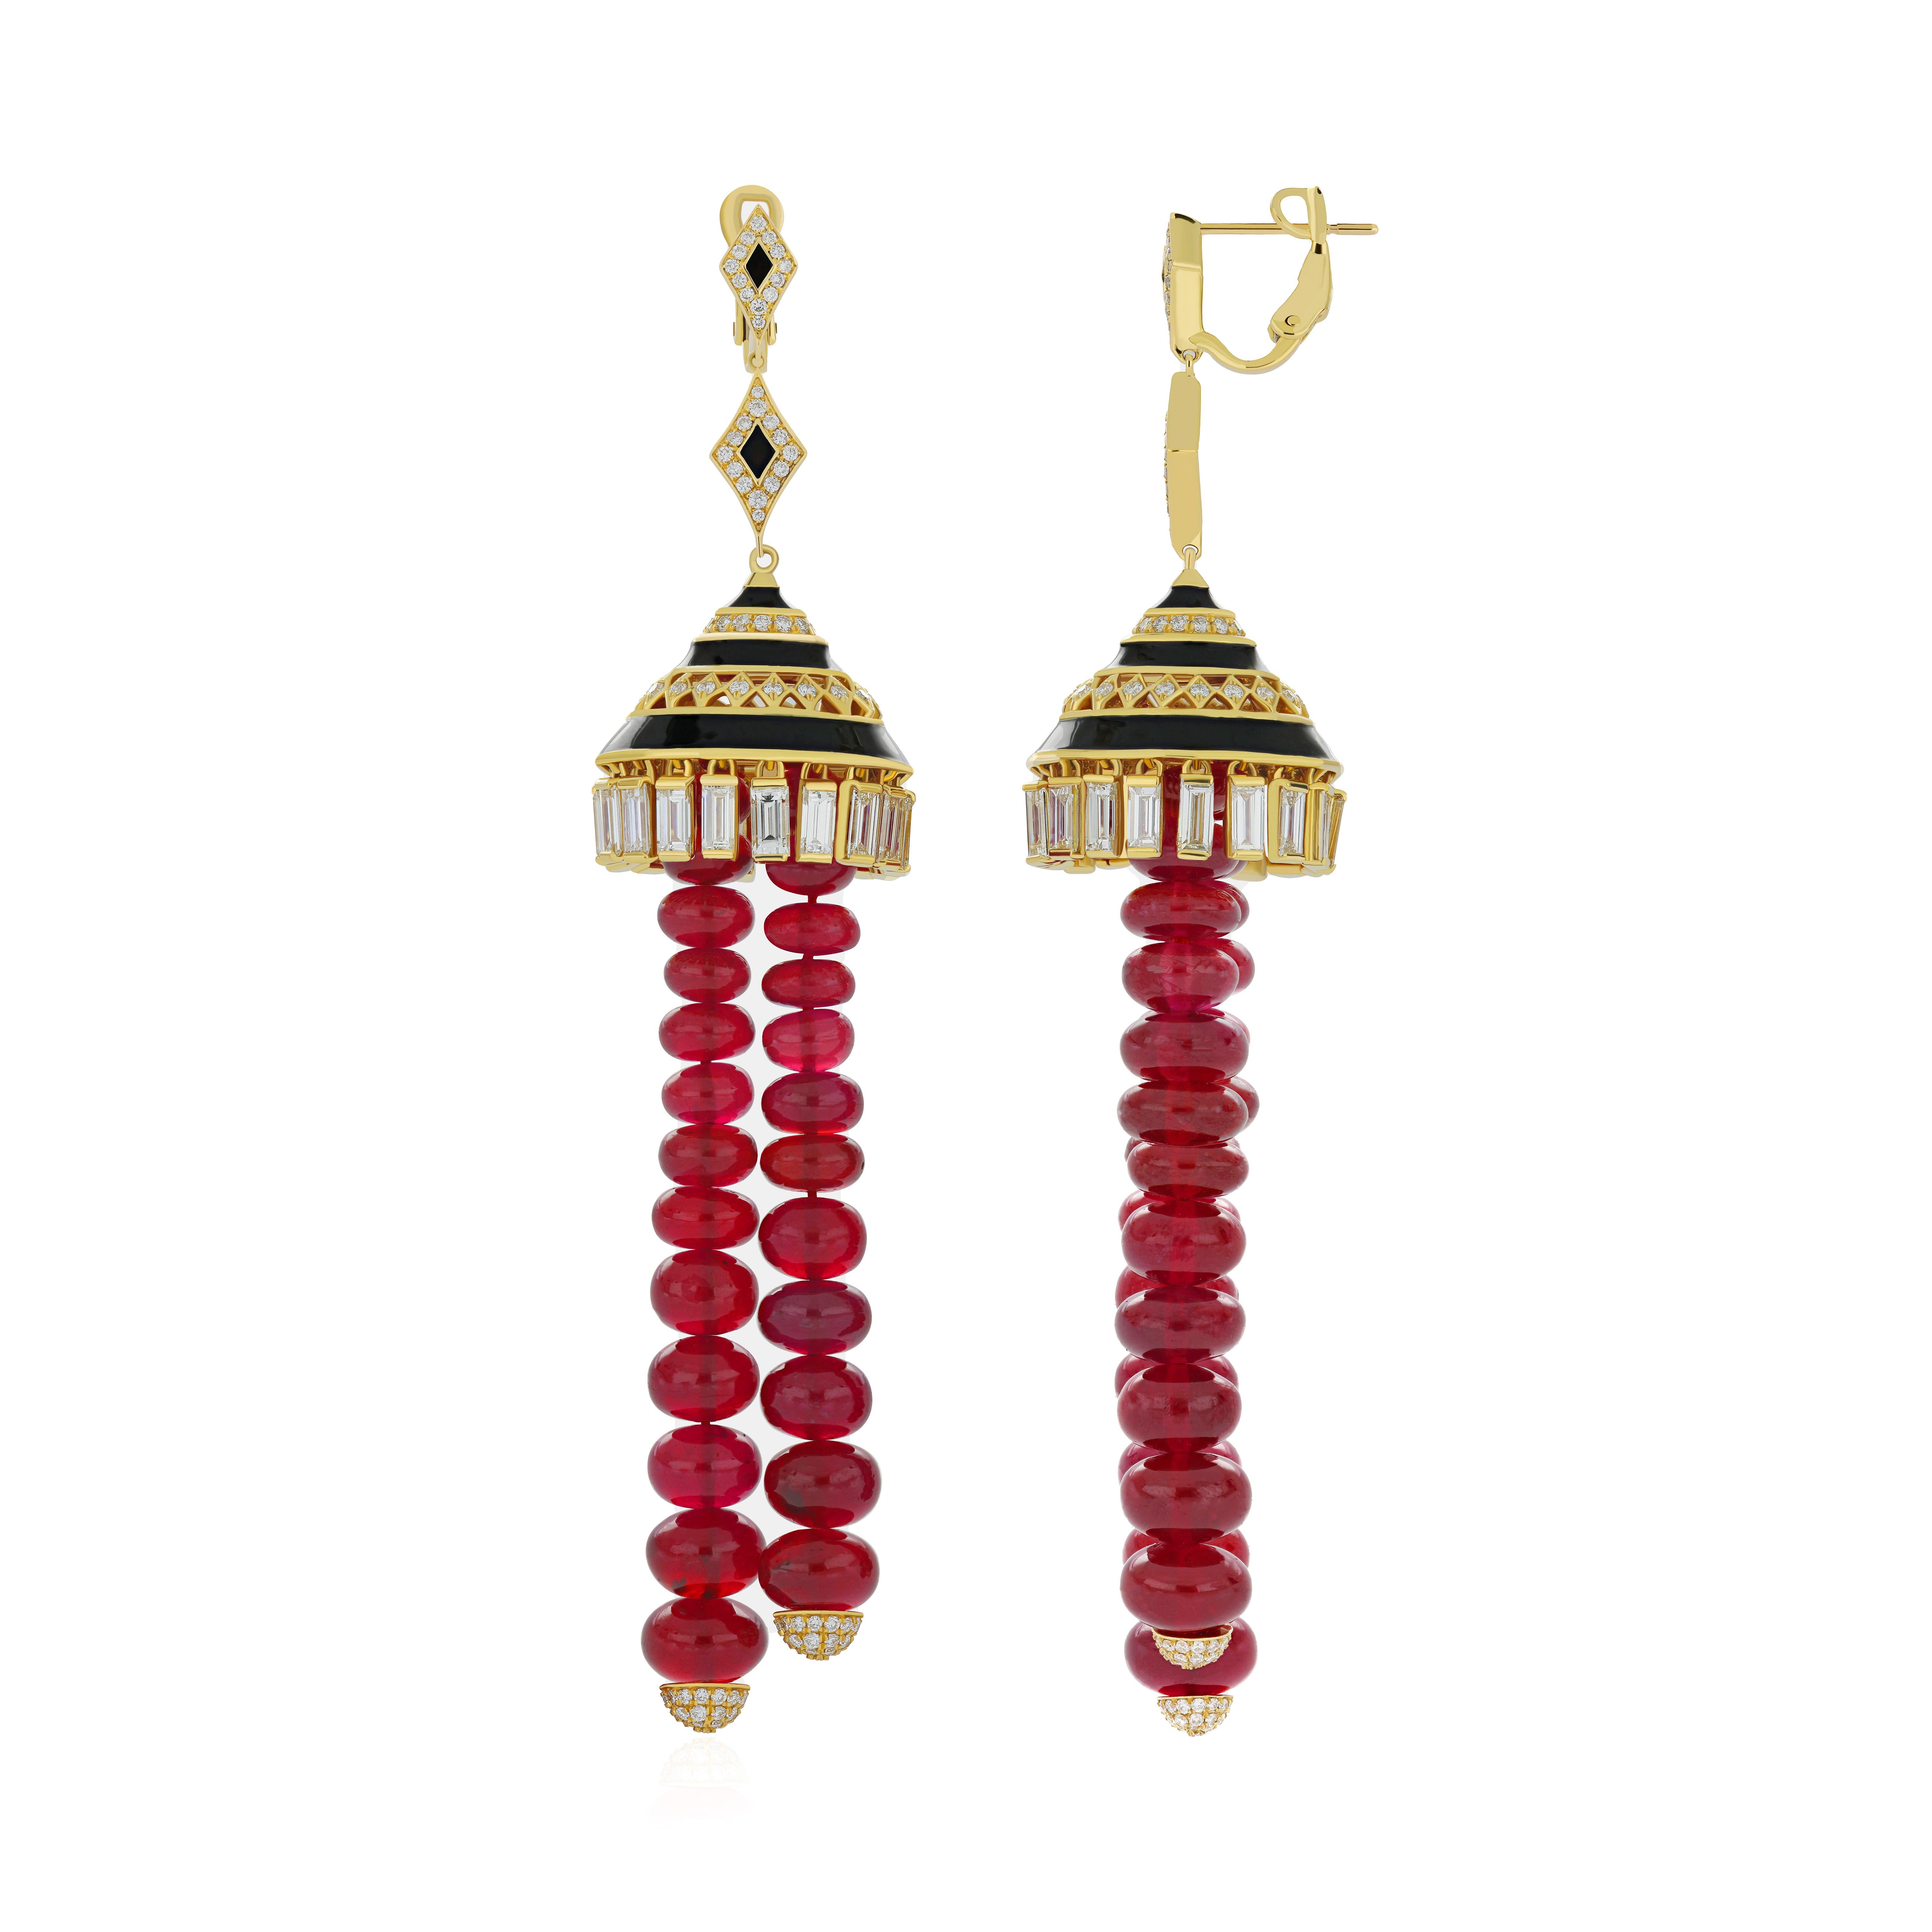 Elegant and Exquisitely Detailed 18 Karat Yellow Gold Earring. Set with Bead Ruby with approx. 113.98Cts, accented with Kite Shape Black Onyx approx. 0.11Cts, and micro pave set Diamond with approx. 5.18Cts, To further enhance the beauty chandelier